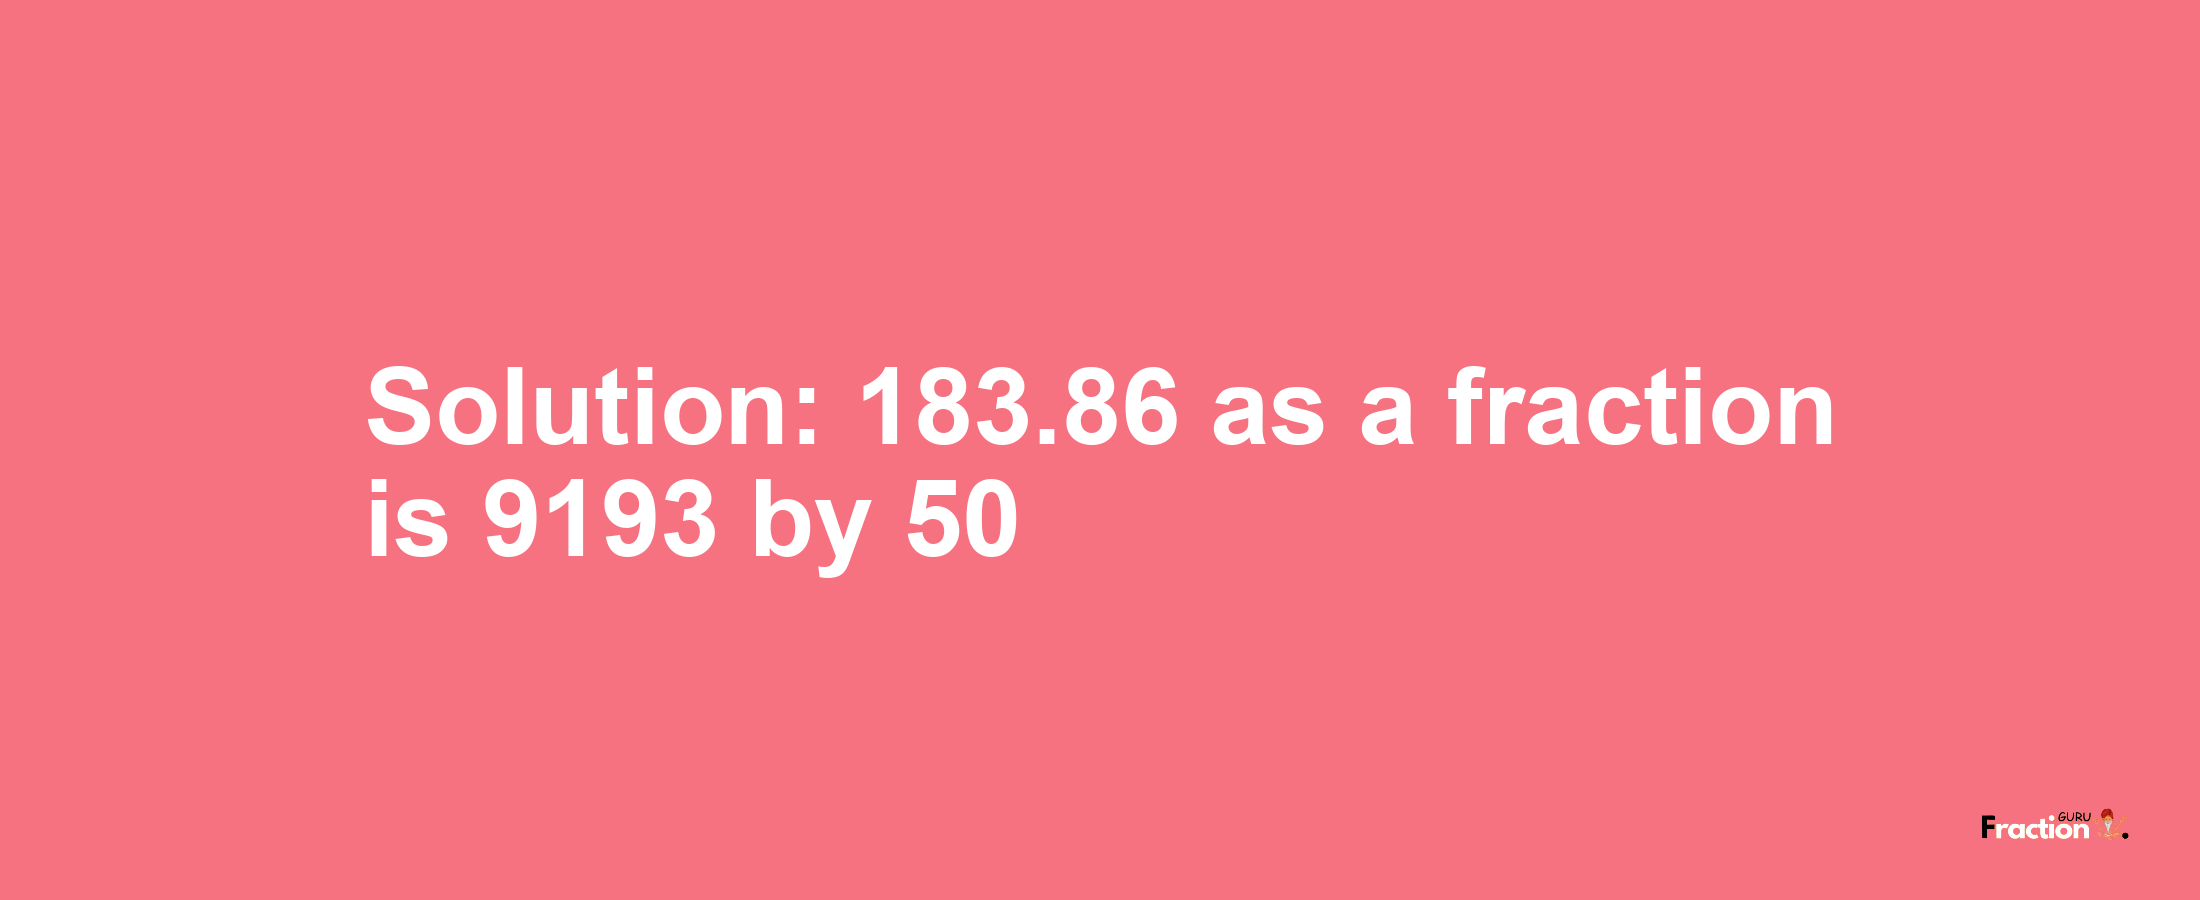 Solution:183.86 as a fraction is 9193/50